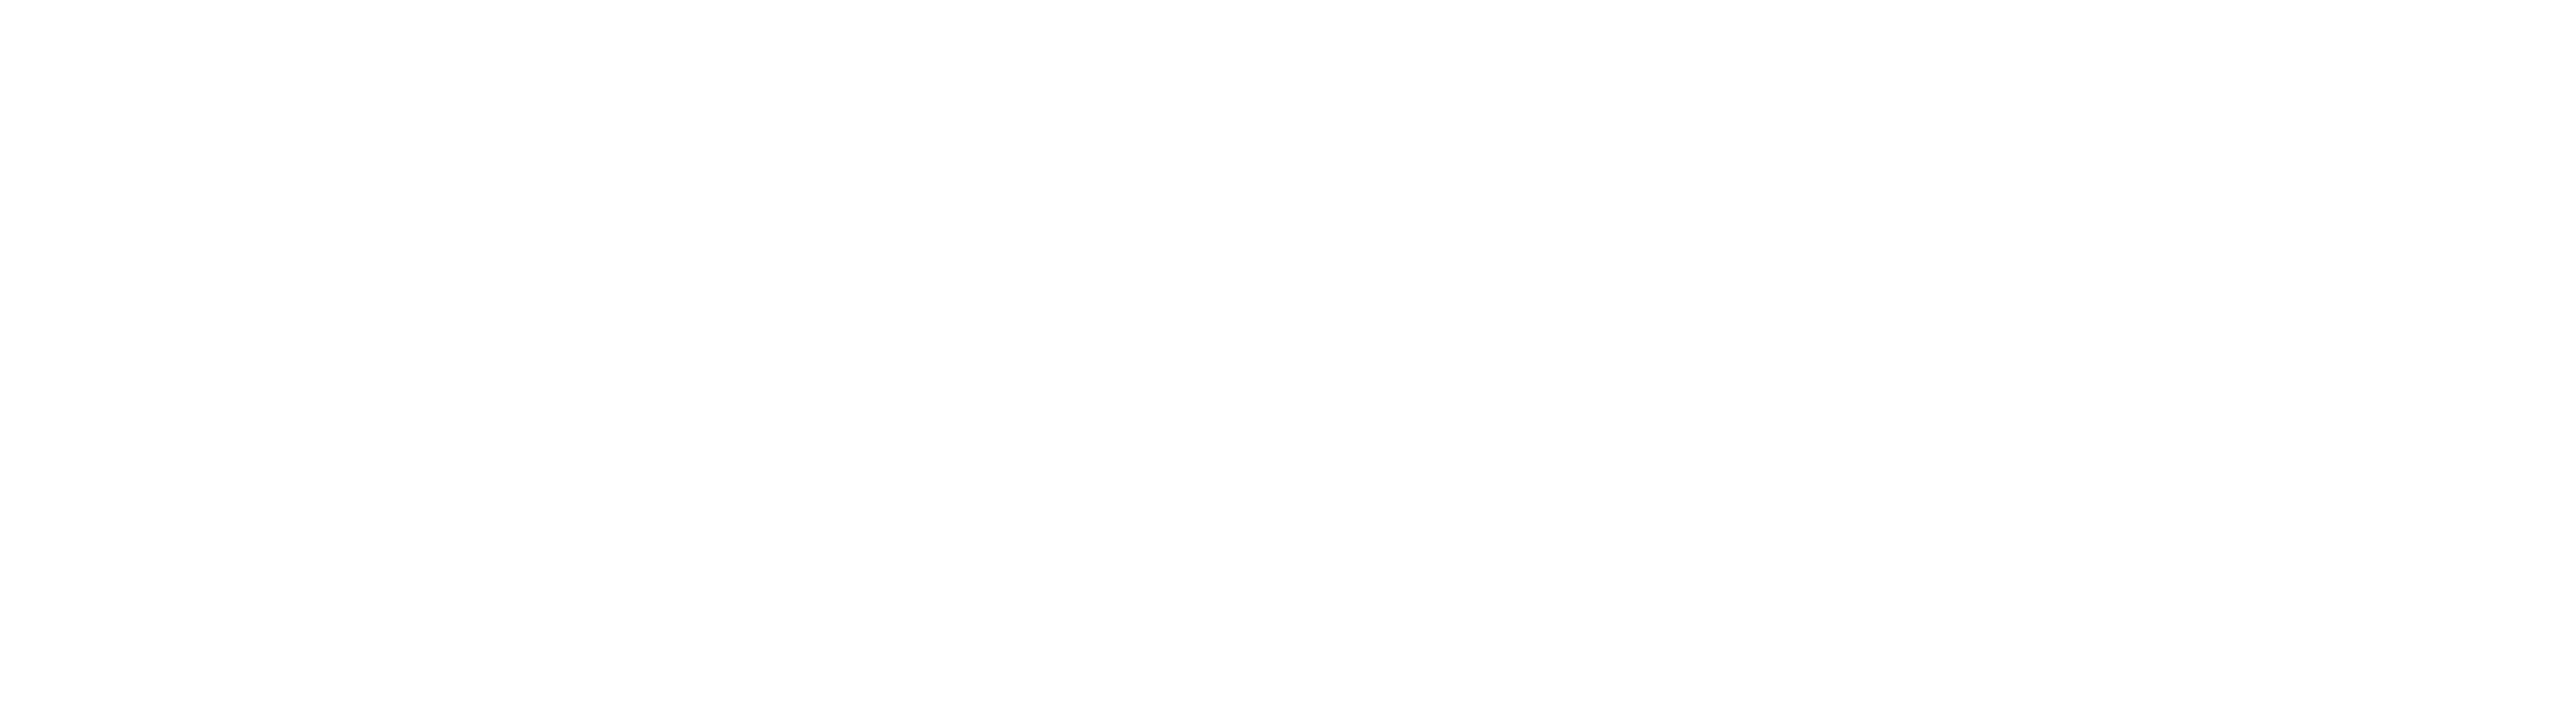 Forces Wellbeing Collective Logo